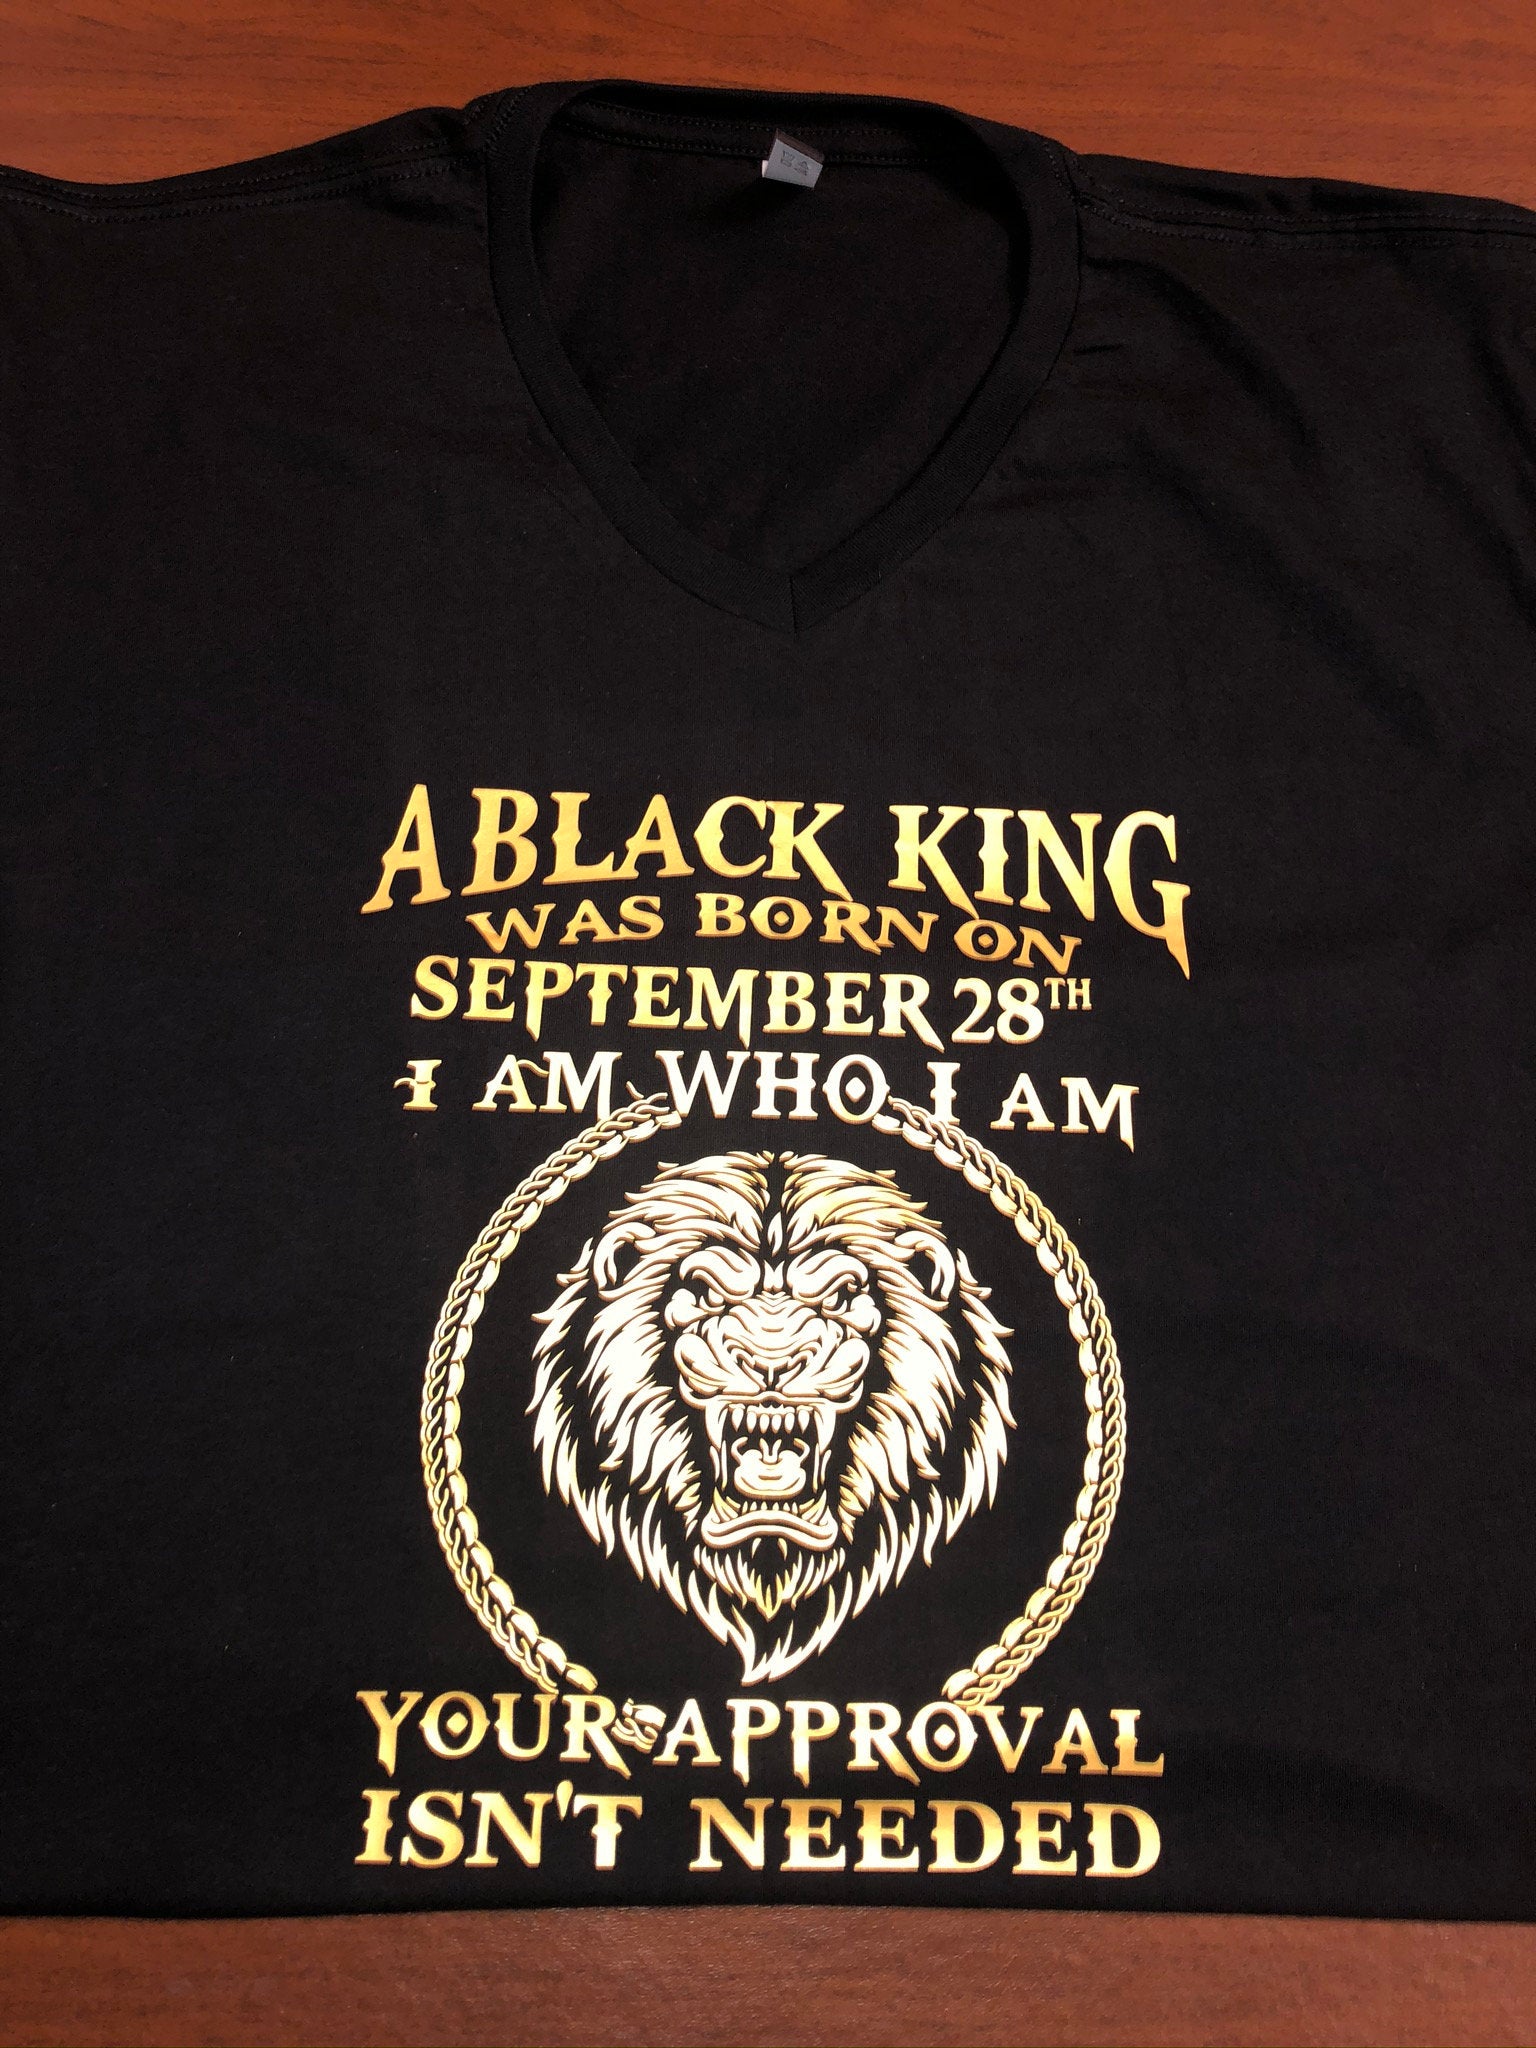 A black king was born on *month and date*